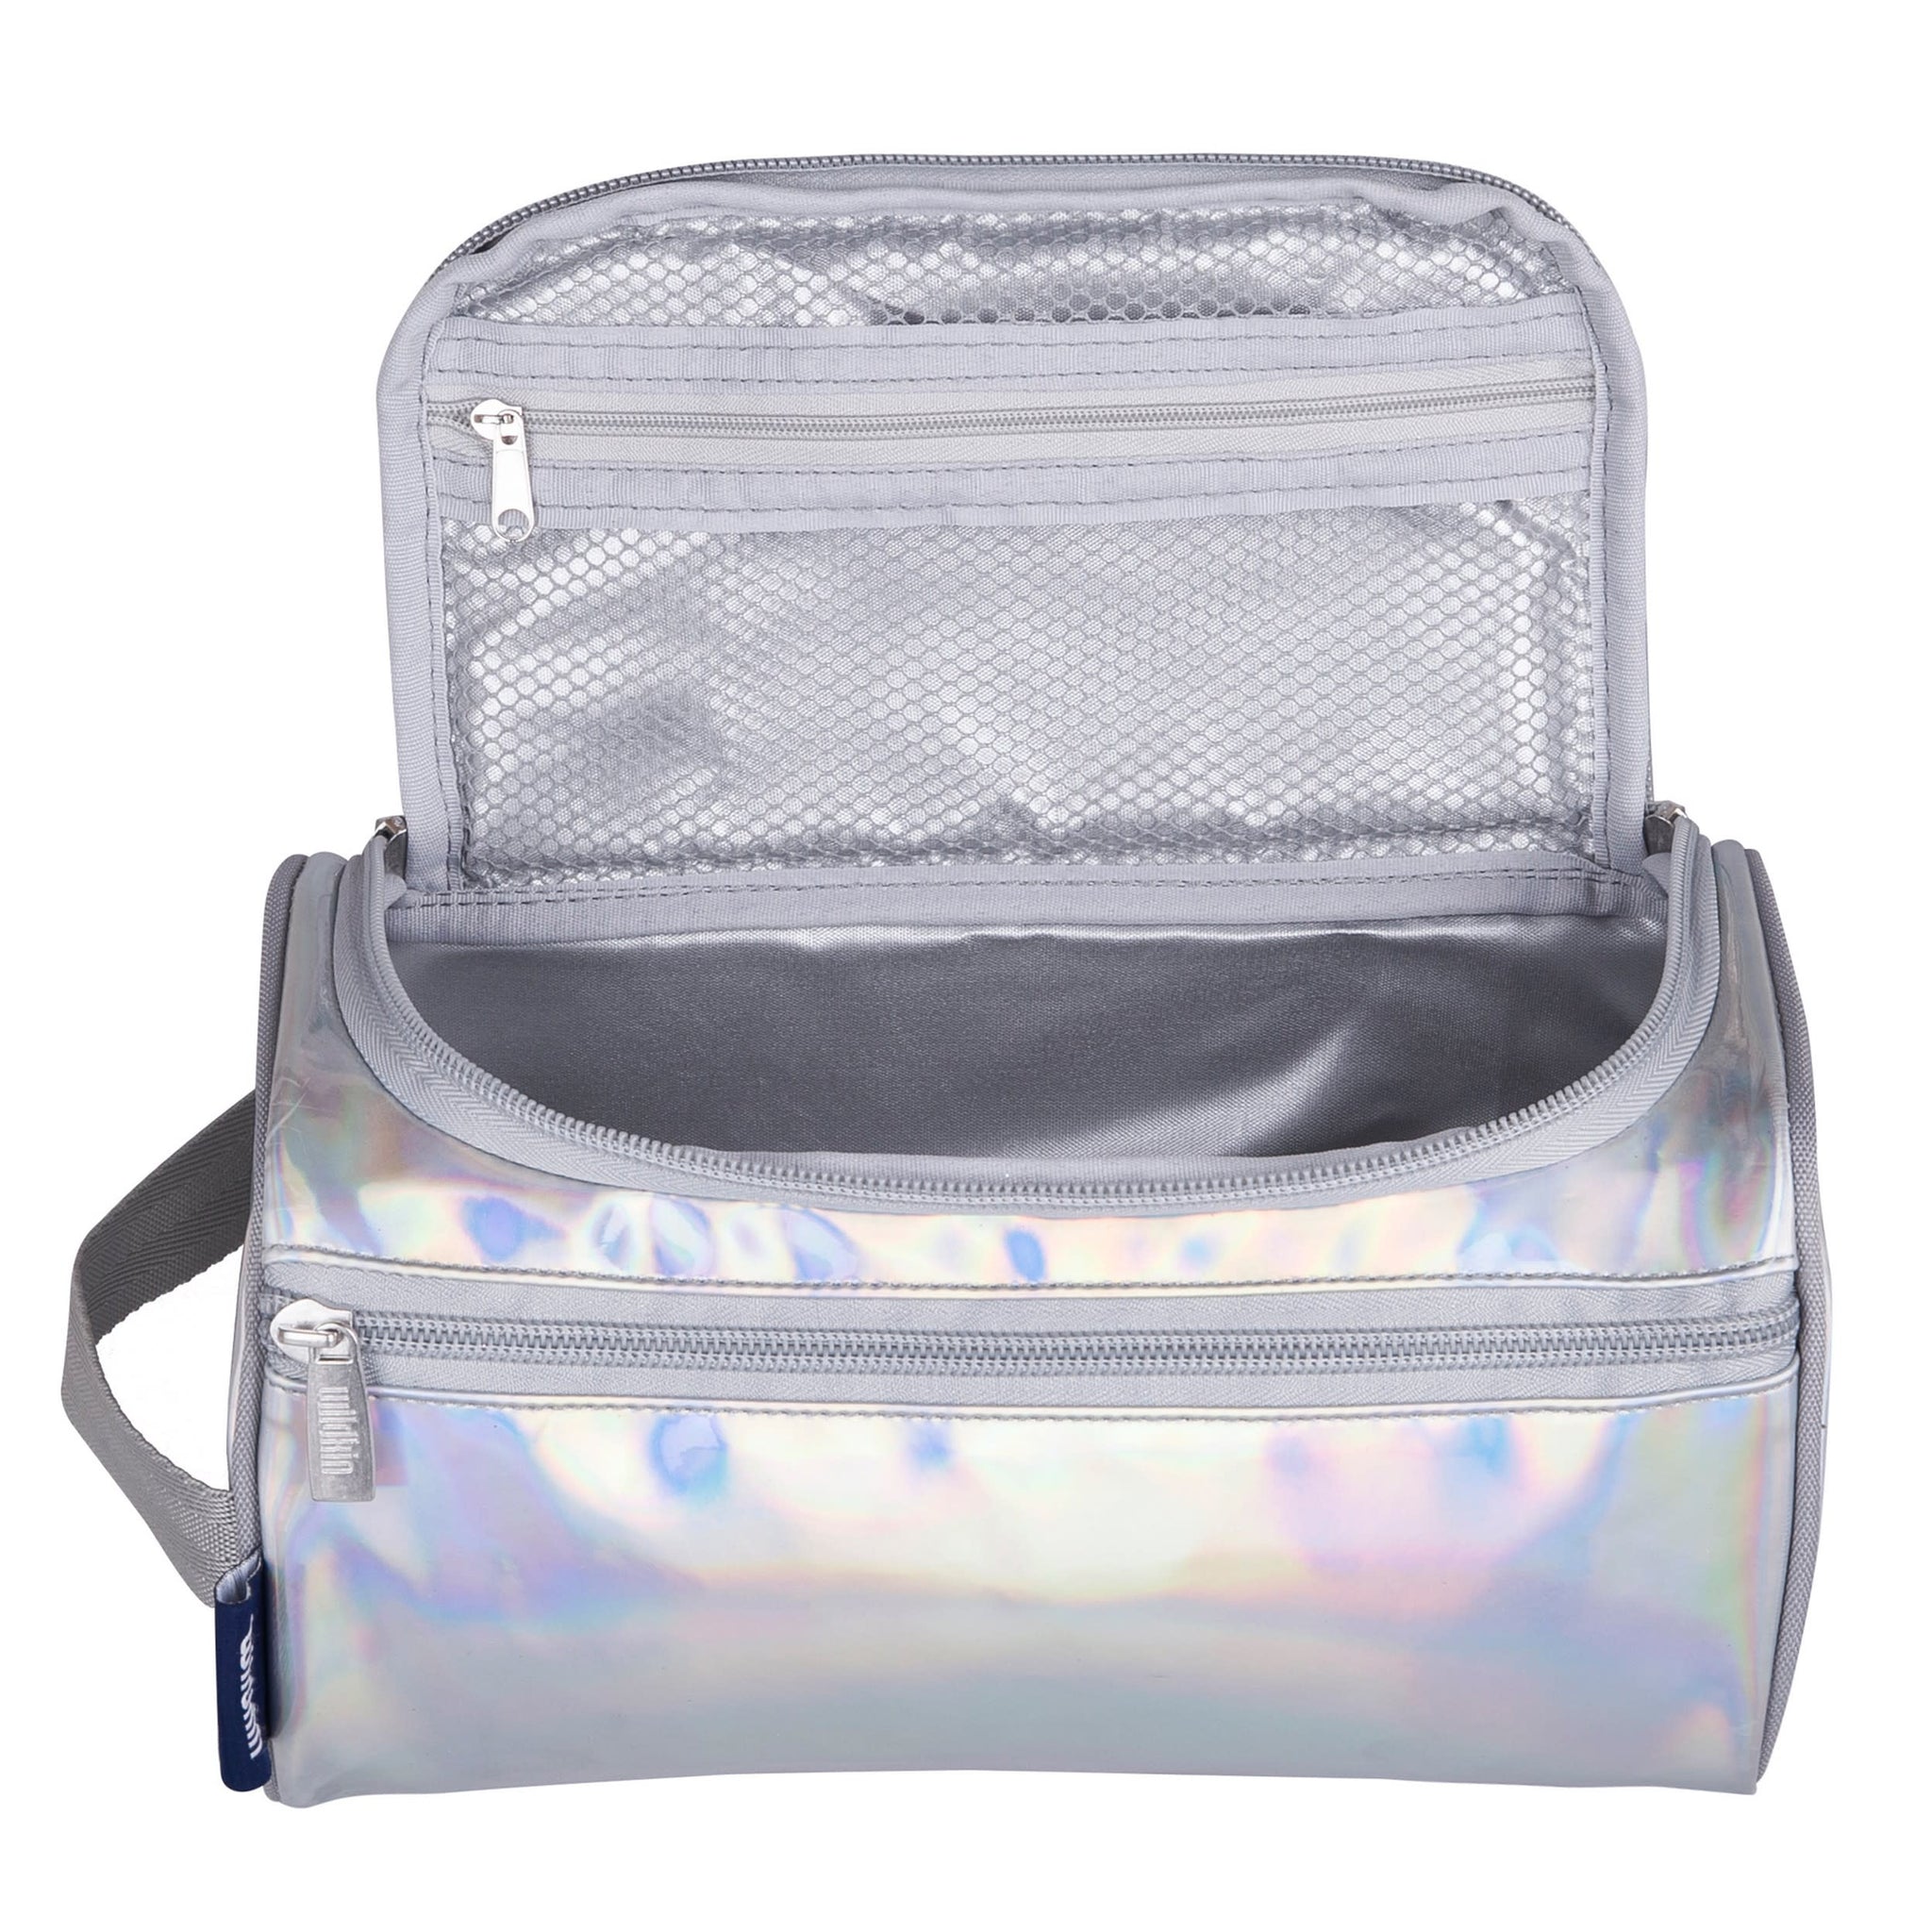 Wildkin Toiletry Bag for KidsTravel Toiletry Bags-Holographic